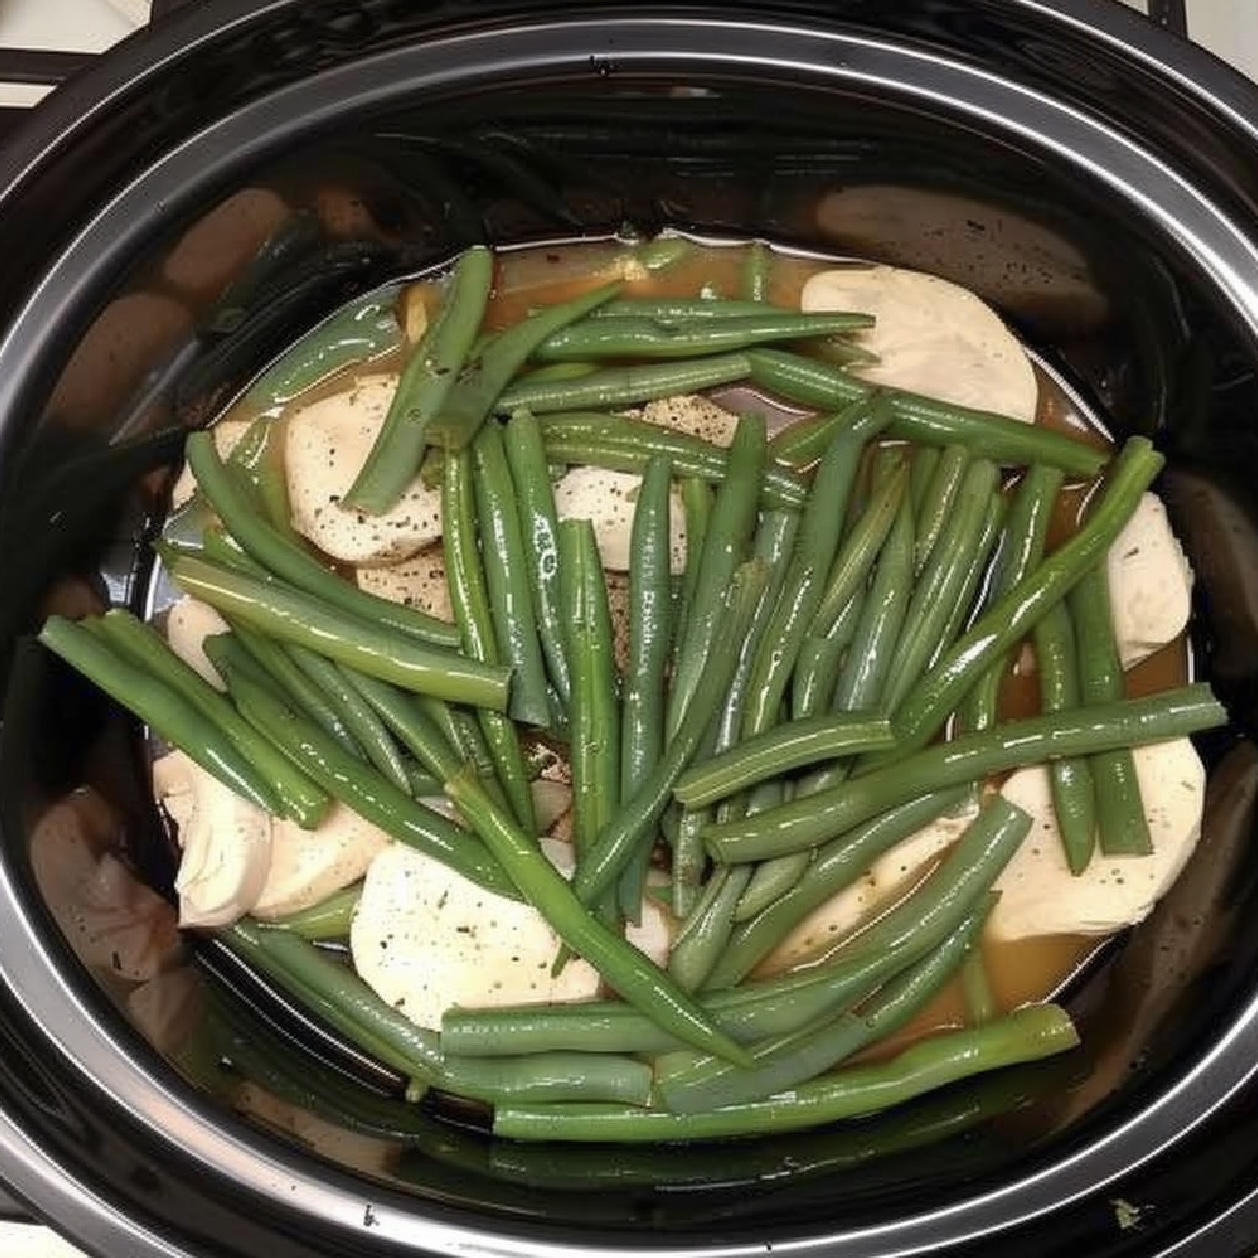 From Our Kitchen to Yours: Slow Cooker Honey Garlic Chicken - A simple, savory meal perfect for any night.